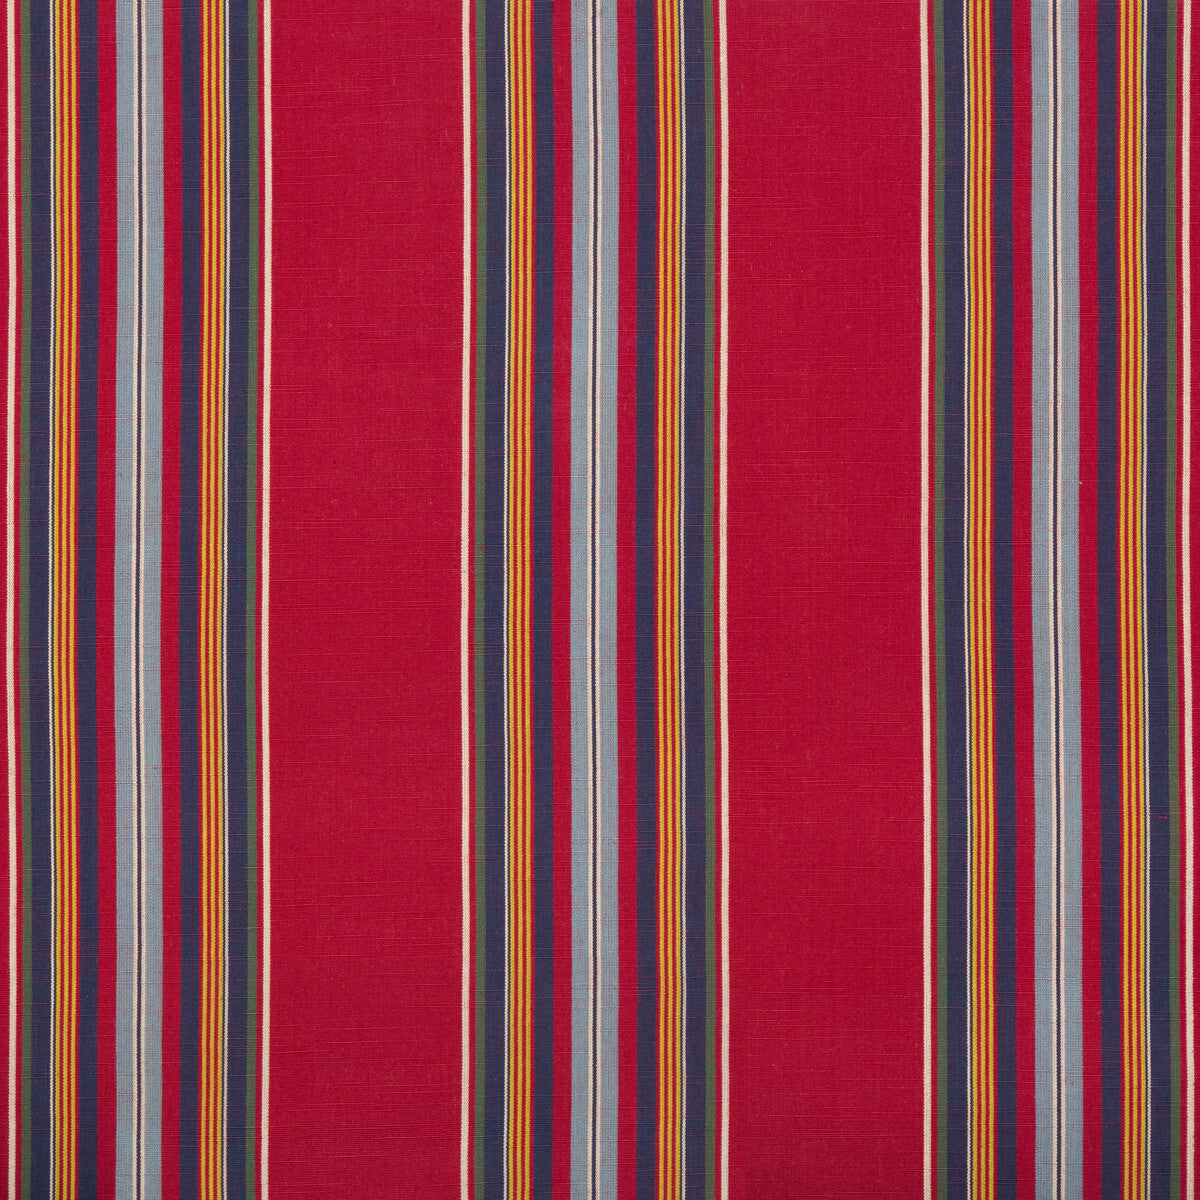 Verdon Stripe fabric in red/navy color - pattern 8017101.950.0 - by Brunschwig &amp; Fils in the Durance collection